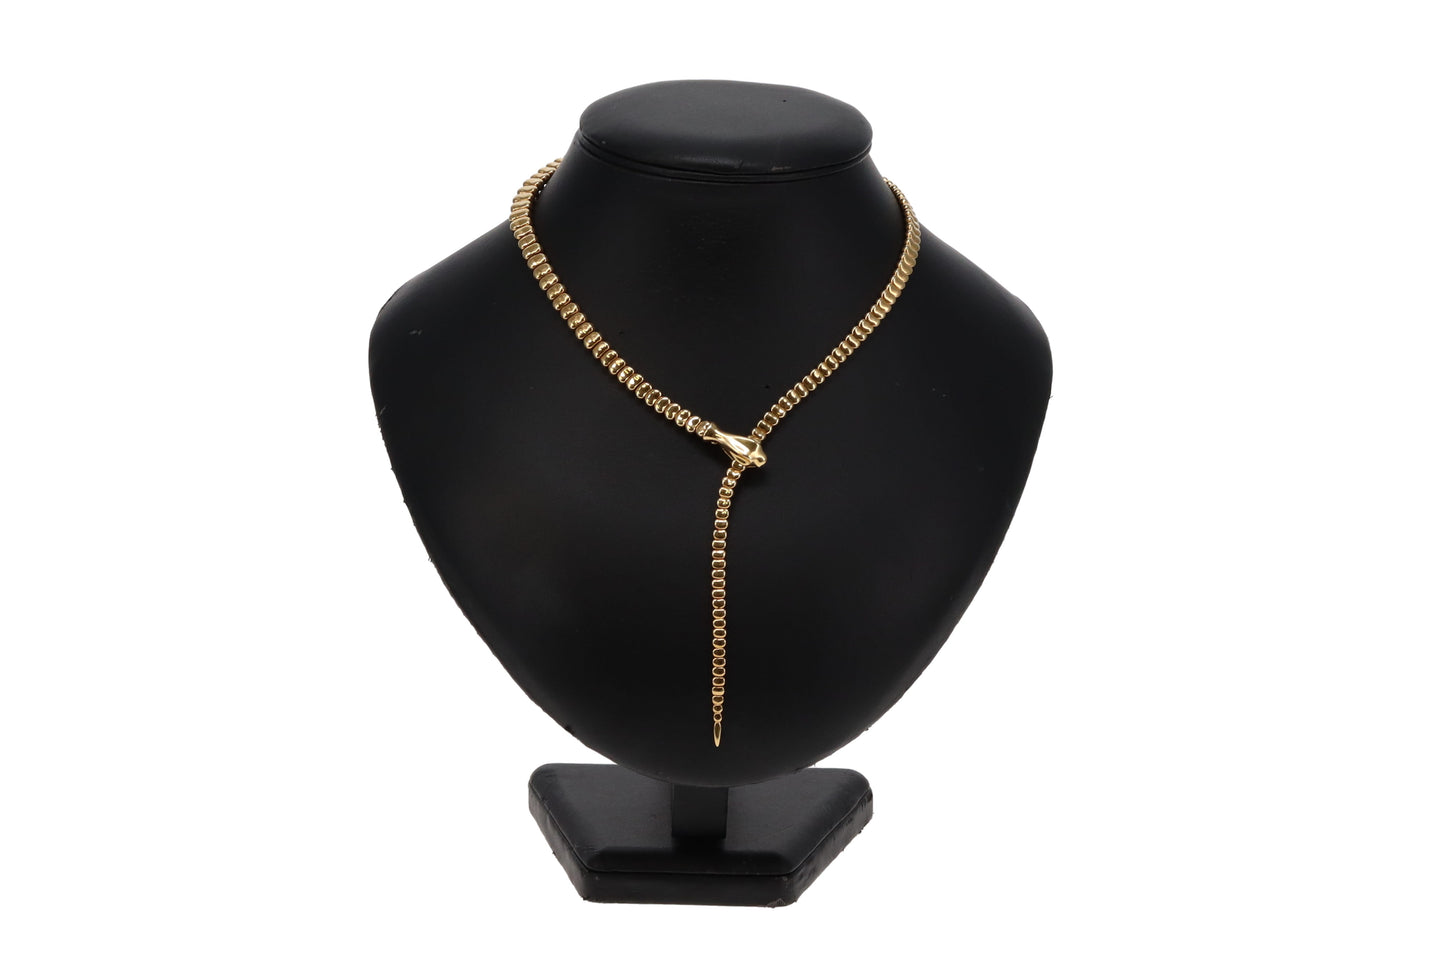 Tiffany & Co Elsa Peretti Snake Necklace In 18k Yellow Gold